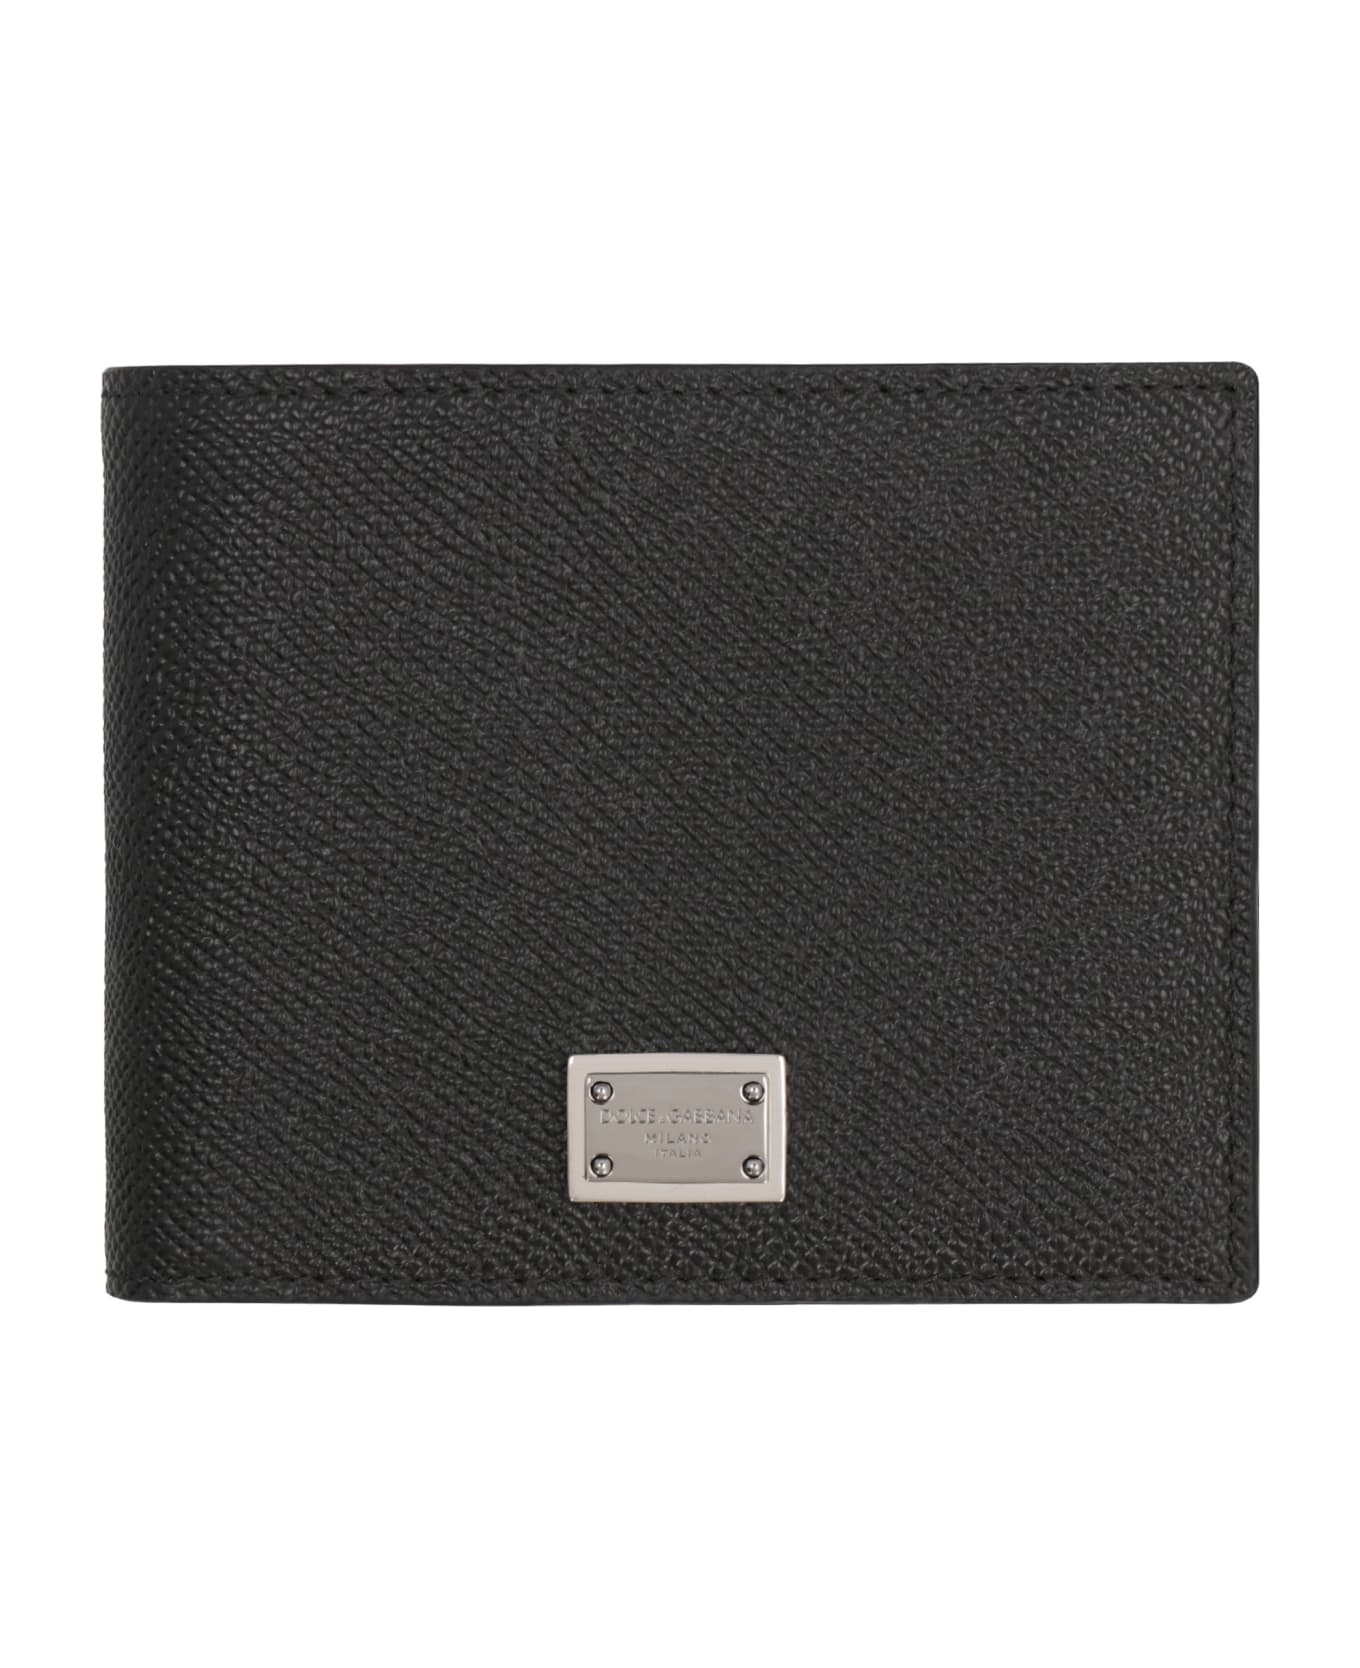 Dolce & Gabbana Leather Flap-over Wallet - Nero